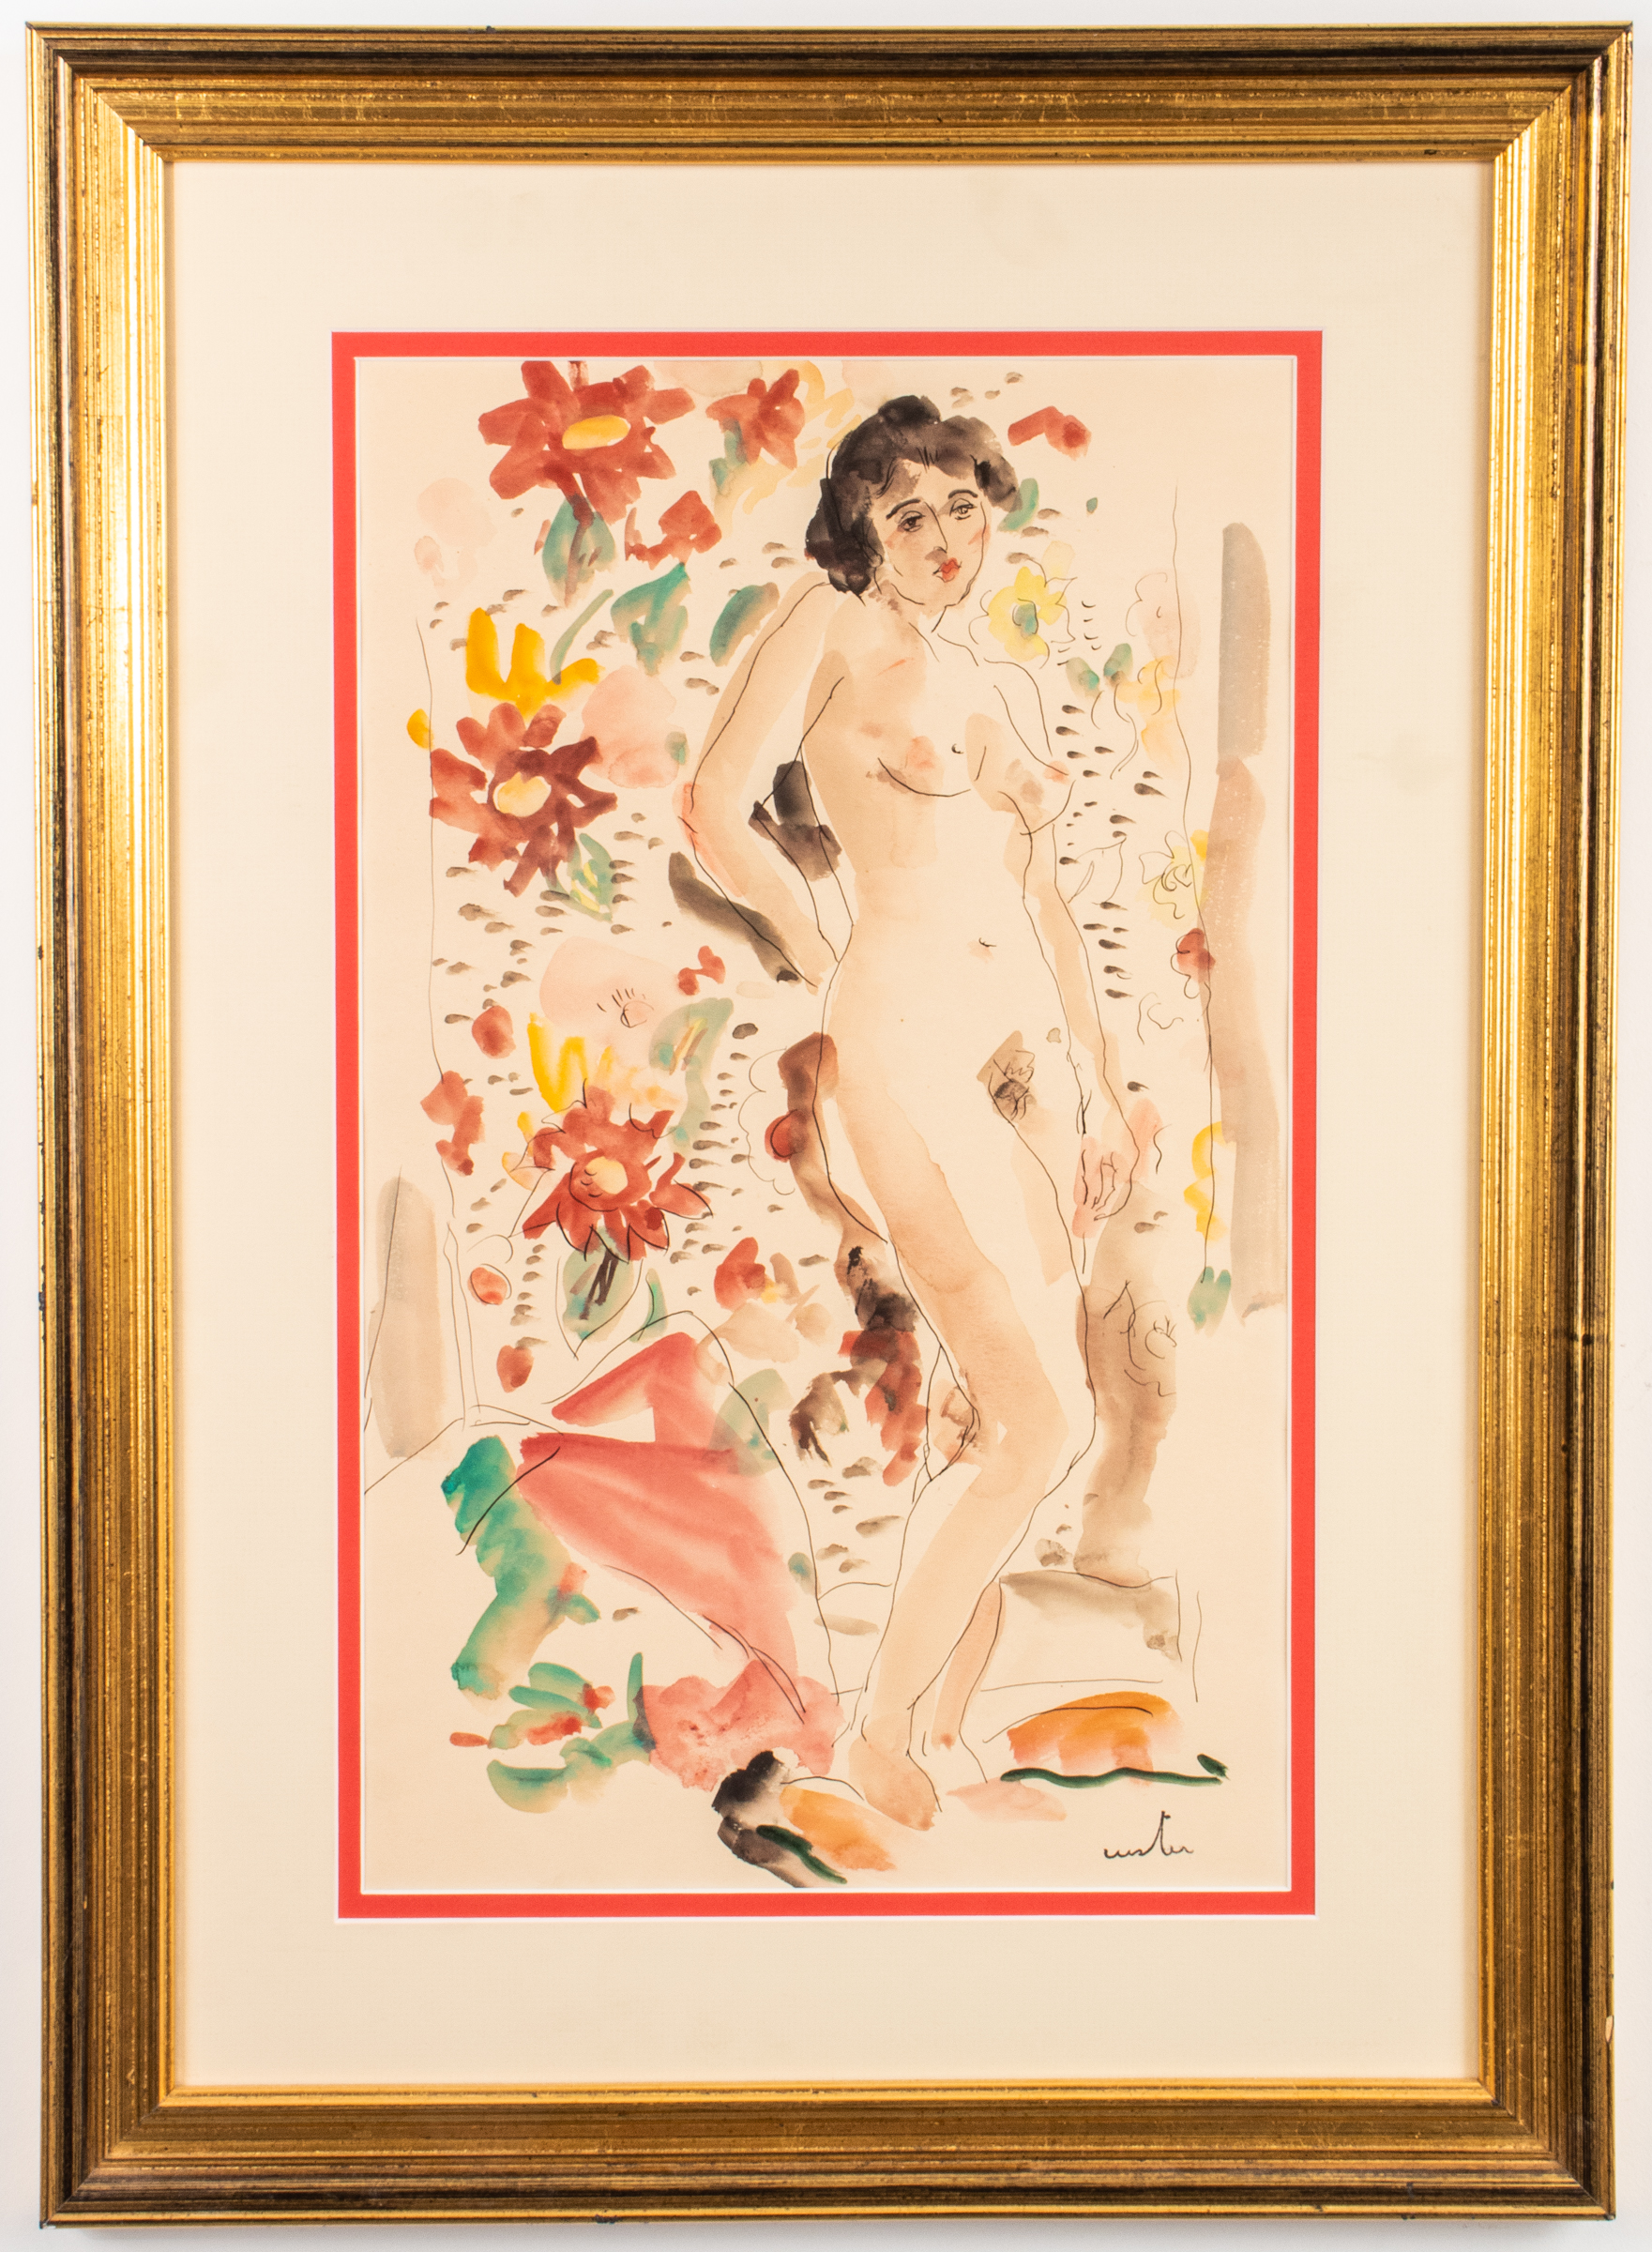 ILLEGIBLY SIGNED NUDE WOMAN WATERCOLOR